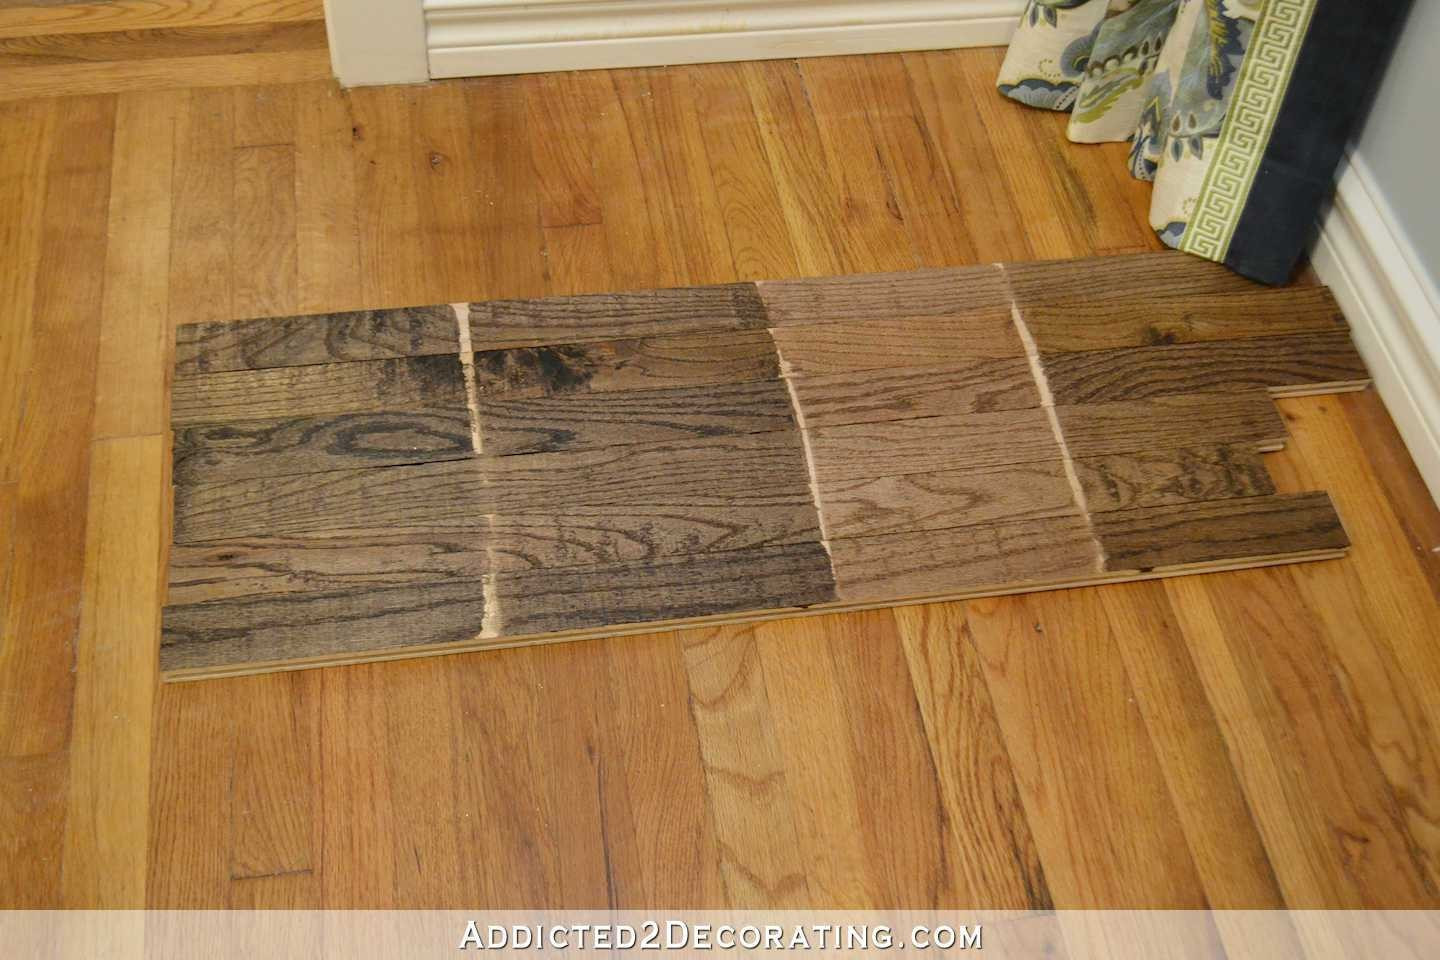 25 Great Hardwood Floor Trends 2018 2024 free download hardwood floor trends 2018 of 15 unique hardwood floor stain colors photos dizpos com intended for hardwood floor stain colors inspirational shocking testing stain colors for my red oak hard